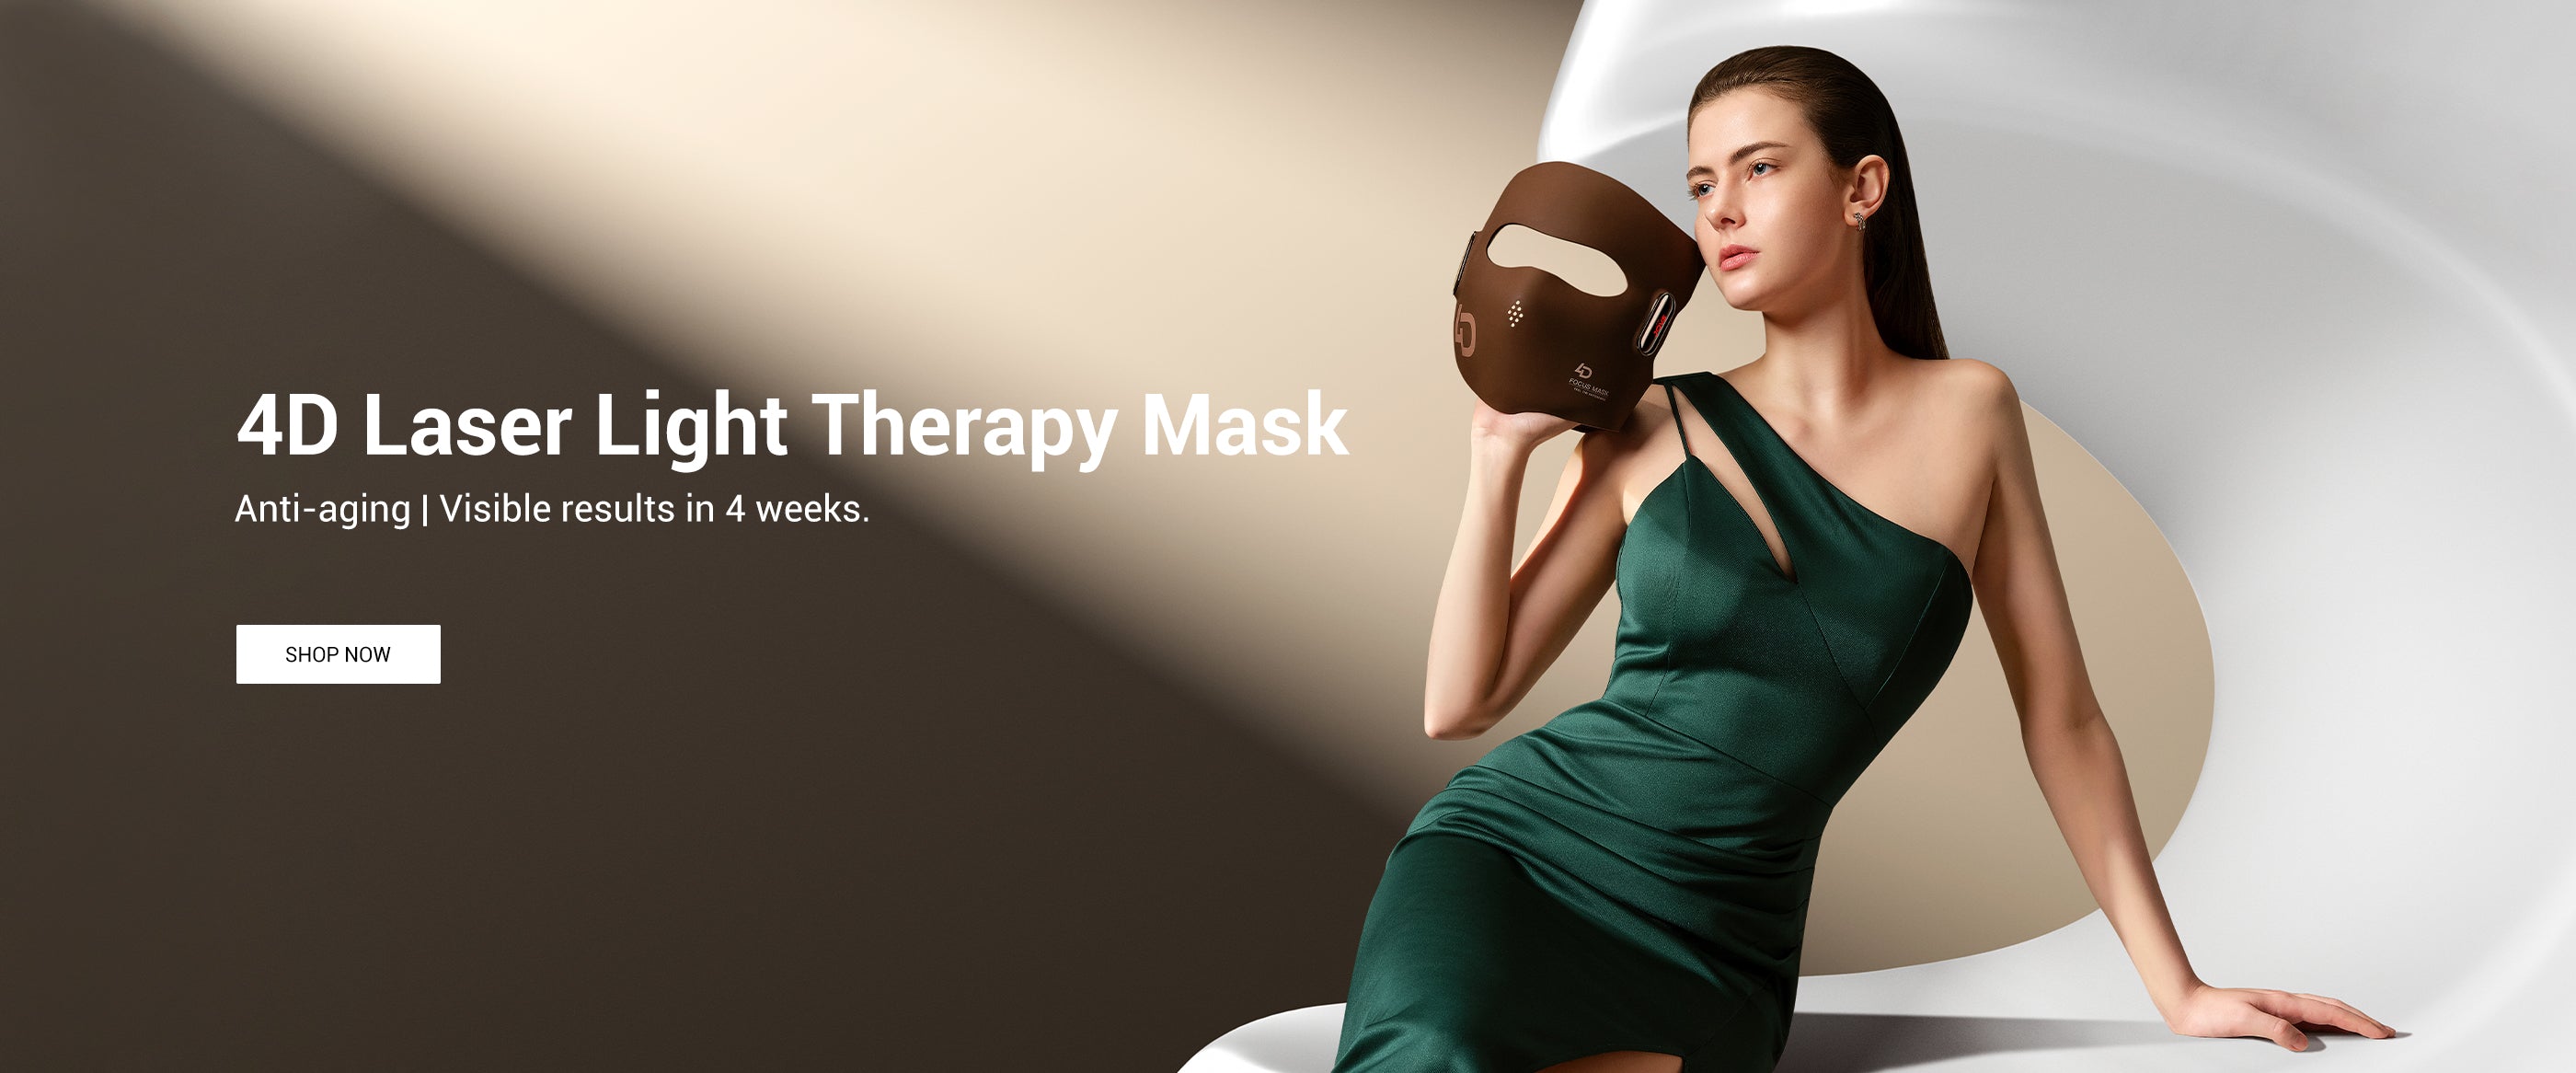 A sophisticated woman in an emerald dress holding the JOVS 4D Laser Light Therapy Mask, promising anti-aging and visible skin improvement in 4 weeks.